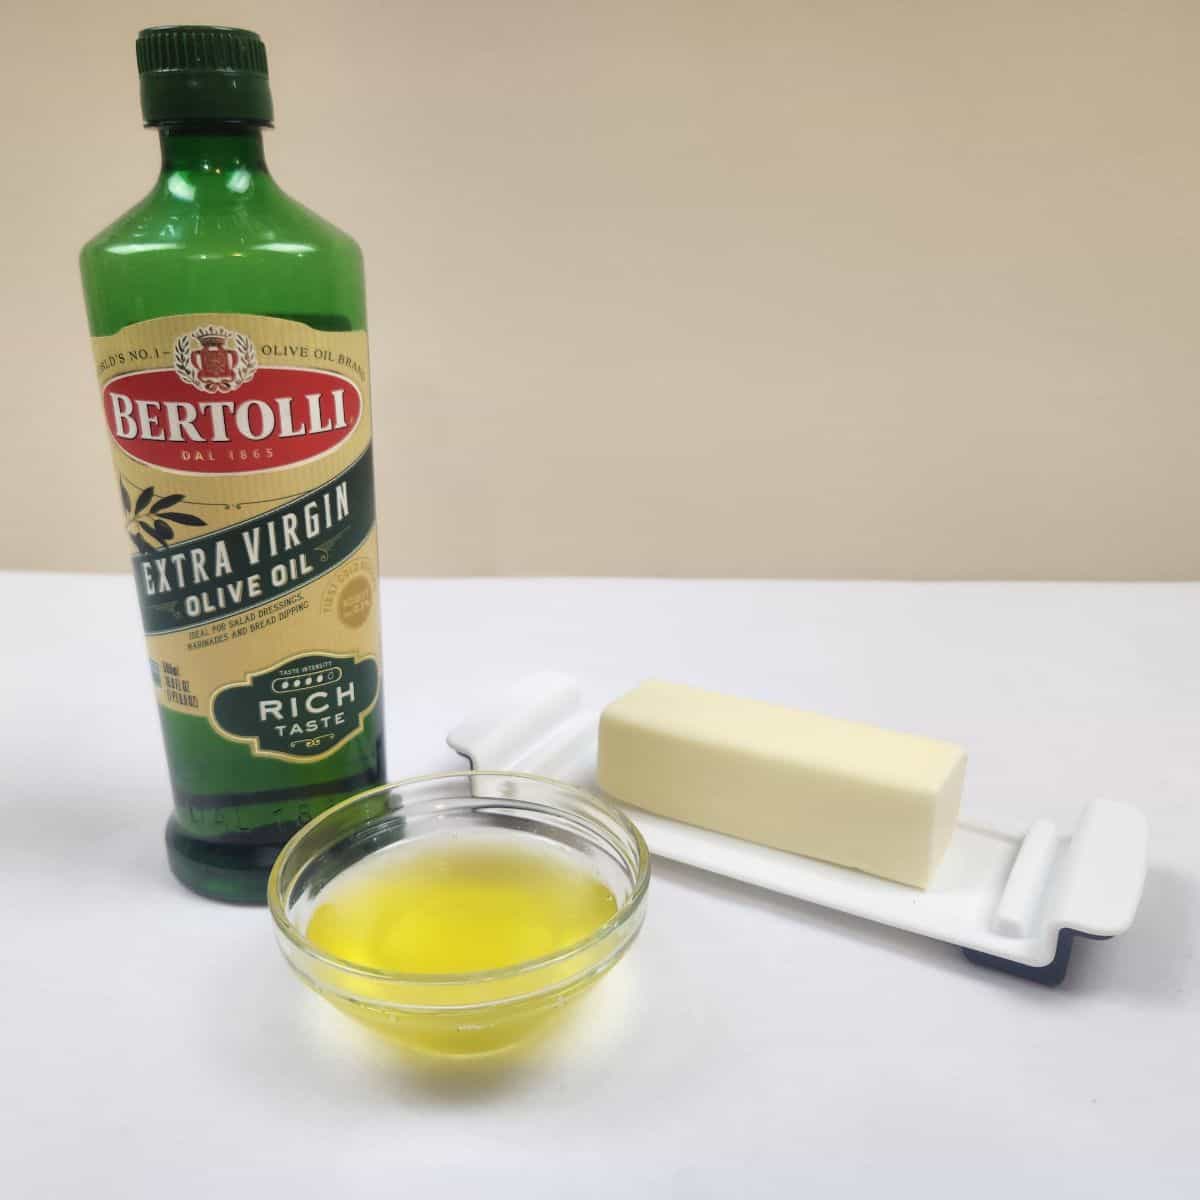 olive oil, clarified butter, and stick of butter